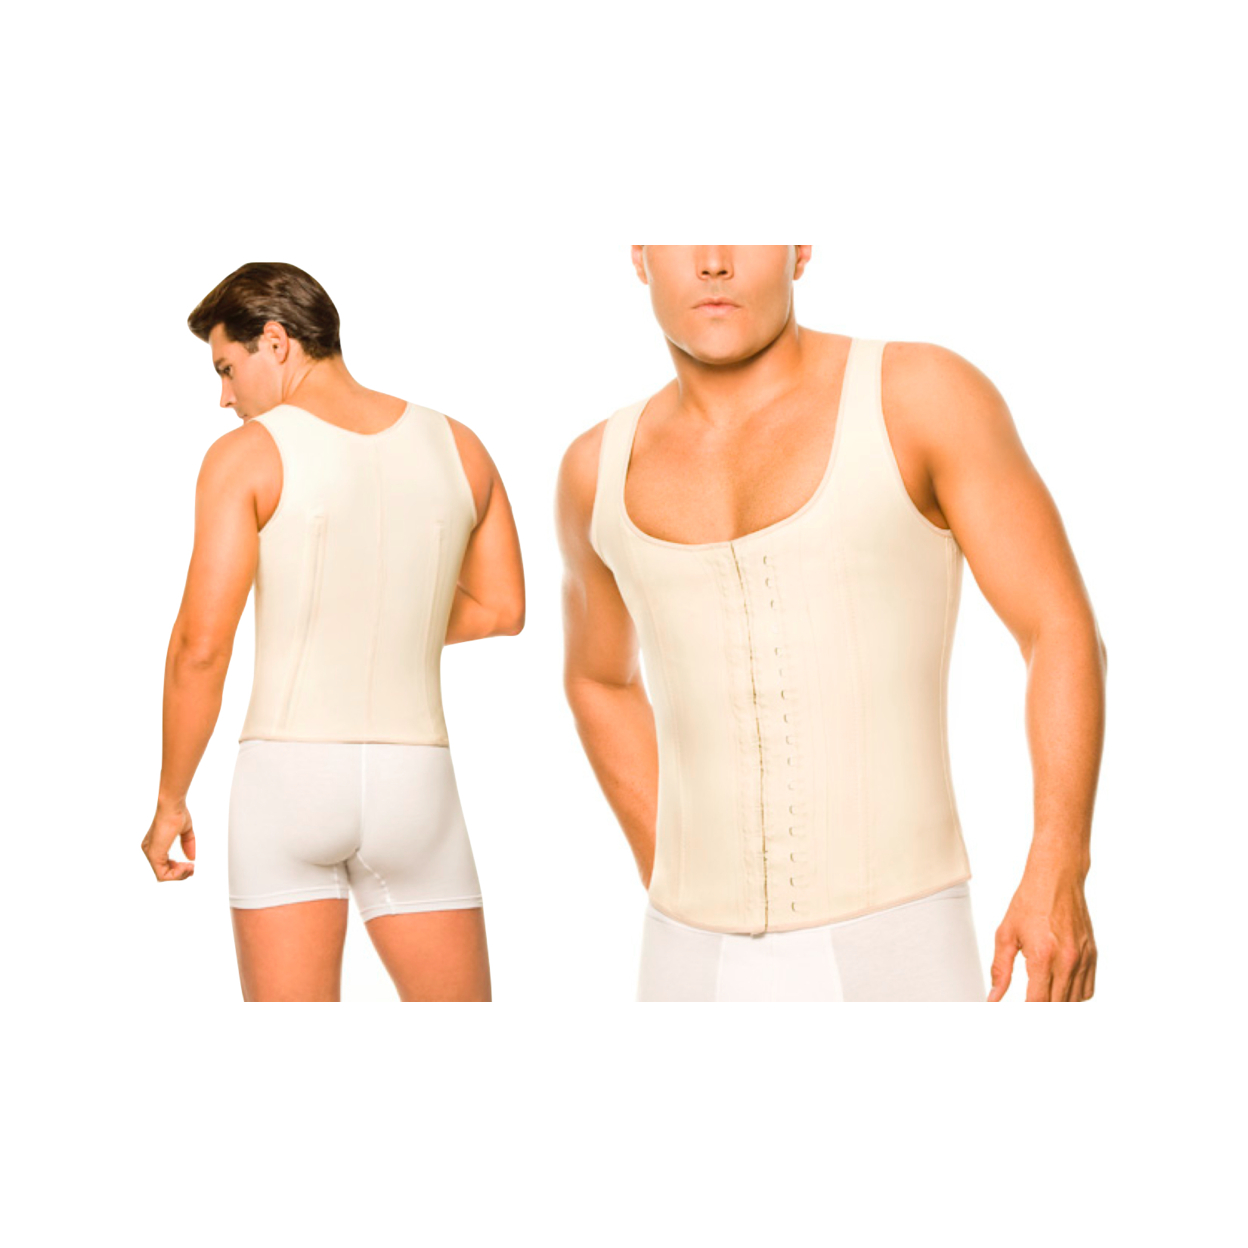 Men Waistcoat High-Compression Body Shaper In Regular And Plus Sizes - Nude, XL